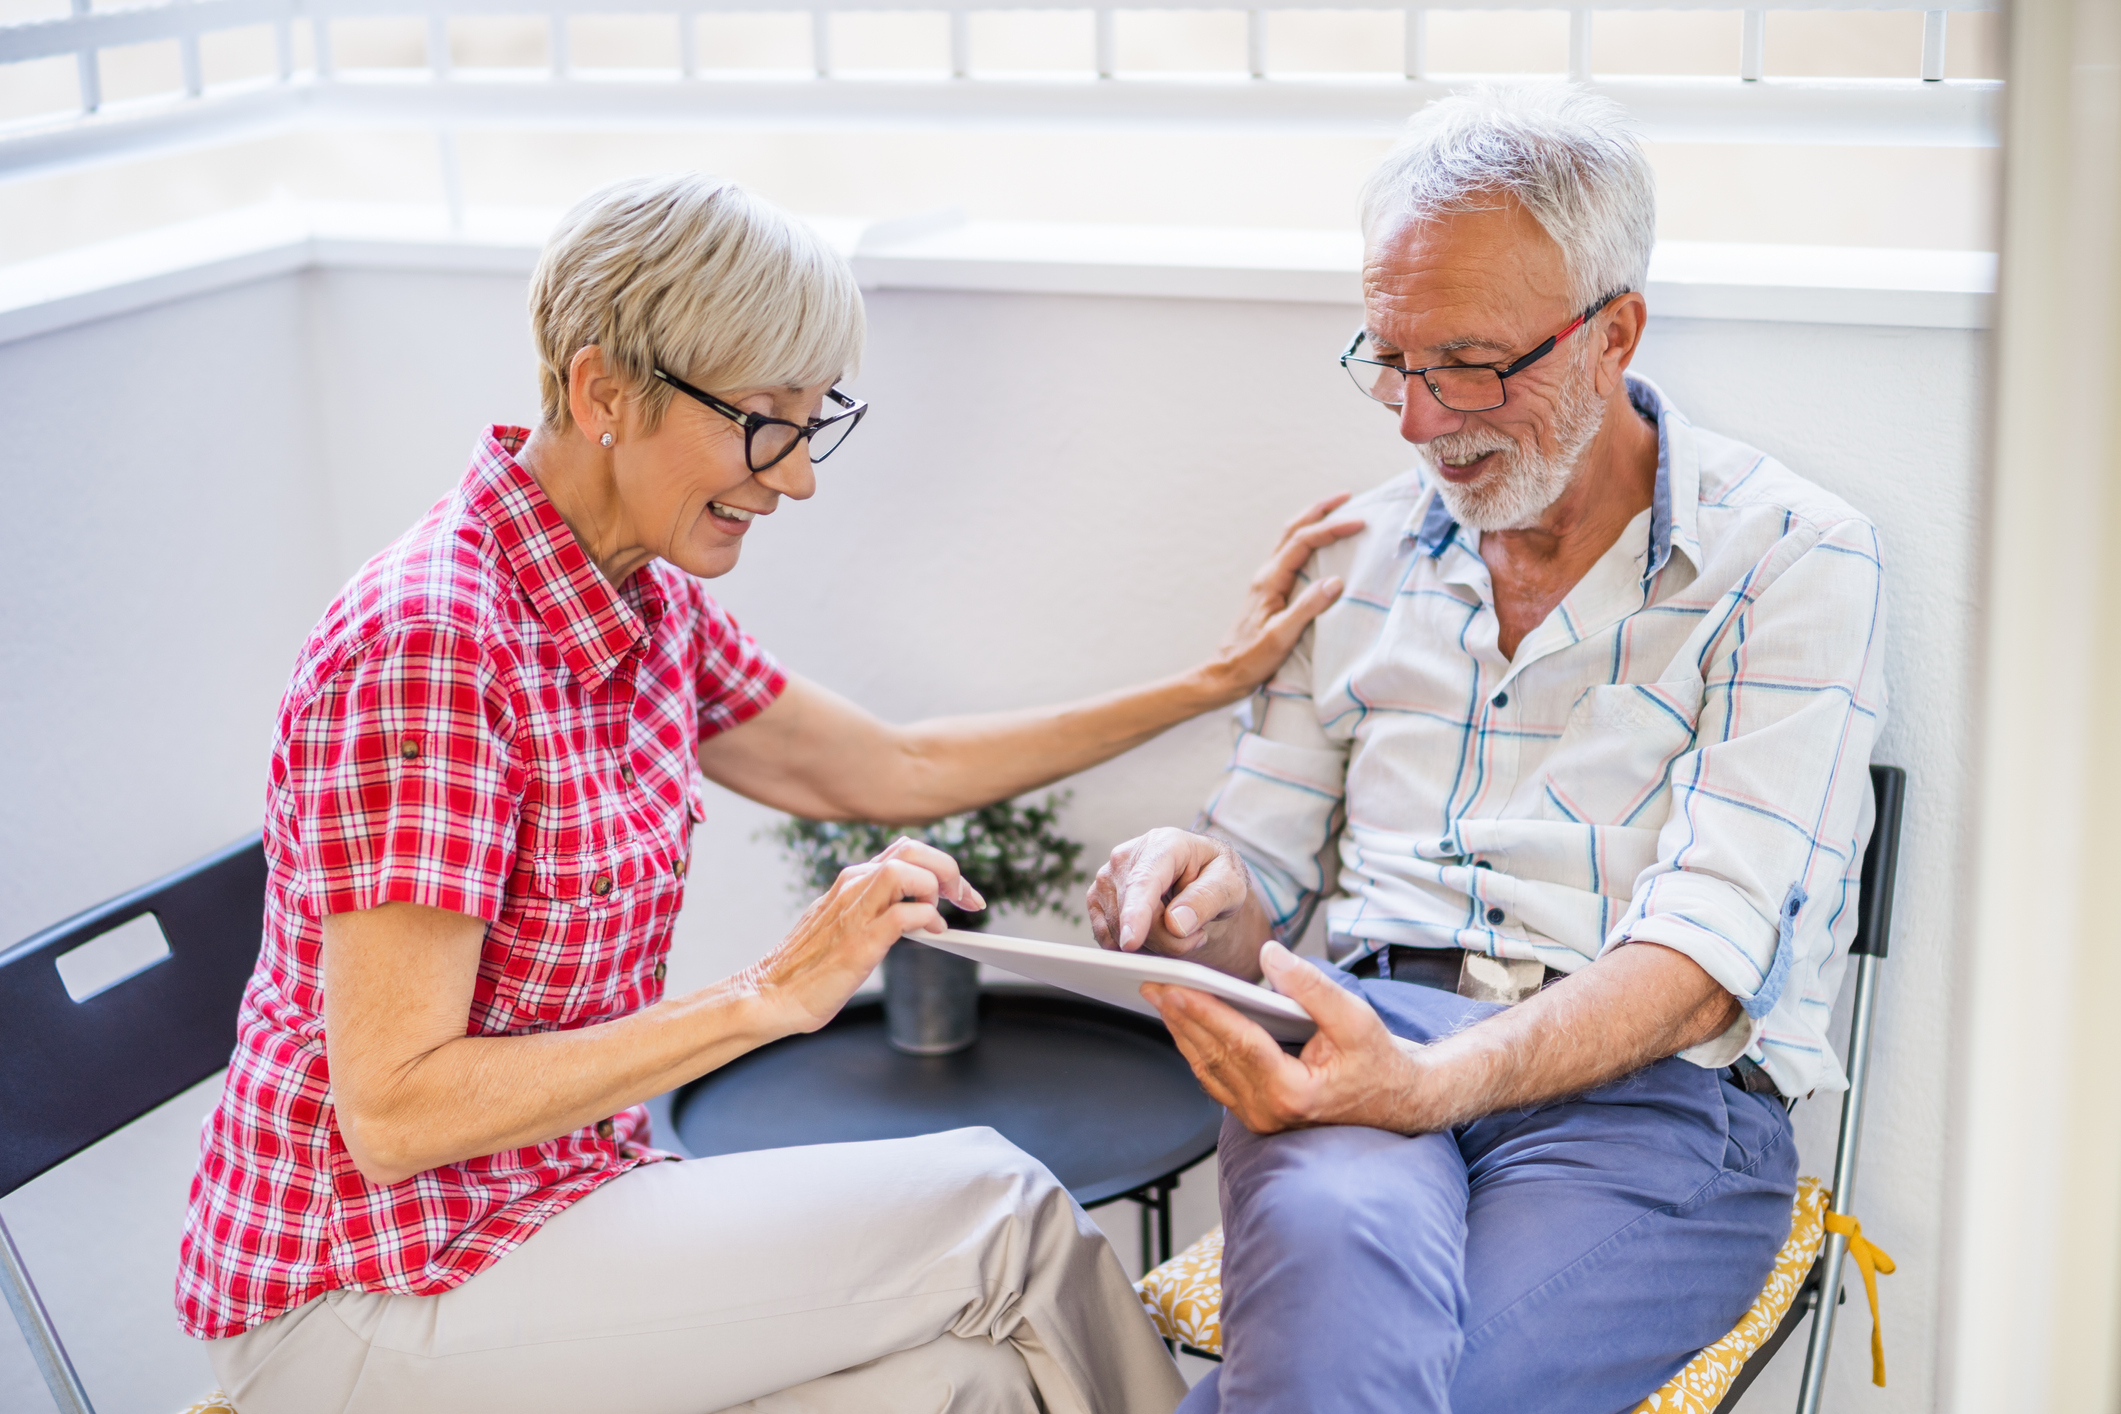 A seated senior woman and man looking at a document, weighing their senior living care options.